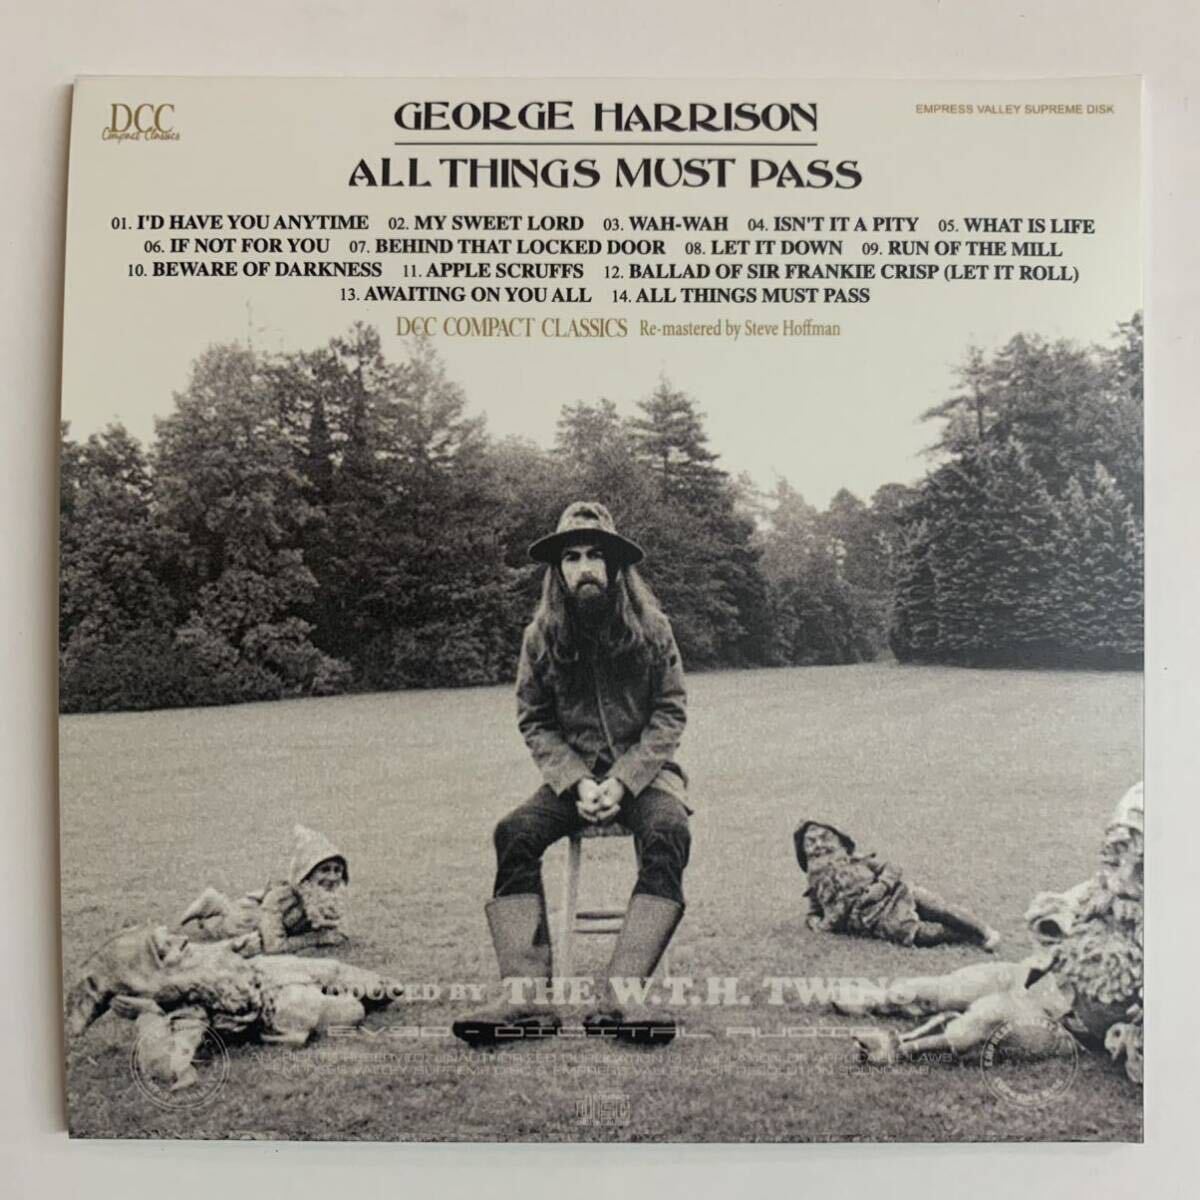 GEORGE HARRISON / ALL THINGS MUST PASS DCC COMPACT CLASSICS Remastered by Steve Hoffman (CD) これは嬉しい紙ジャケット仕様★_画像4